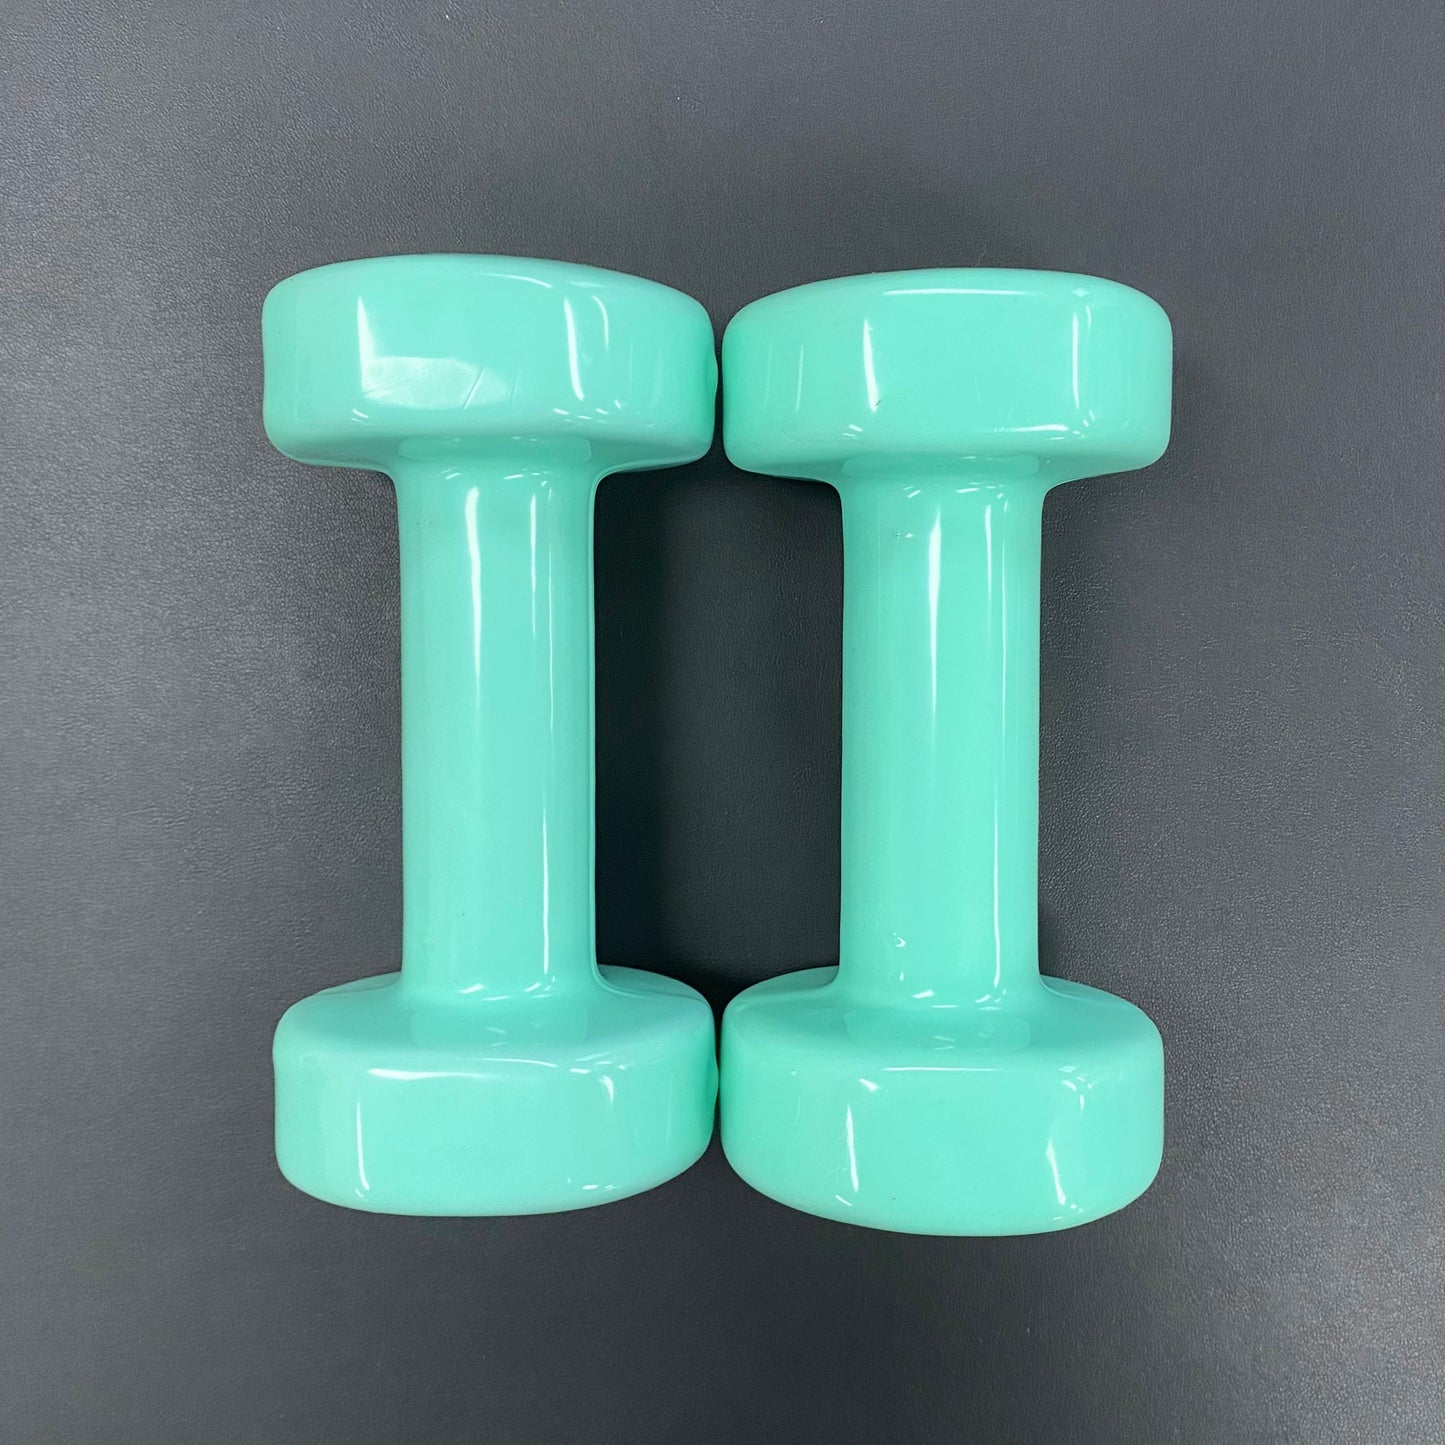 3kg Hand Held Weights- One pair